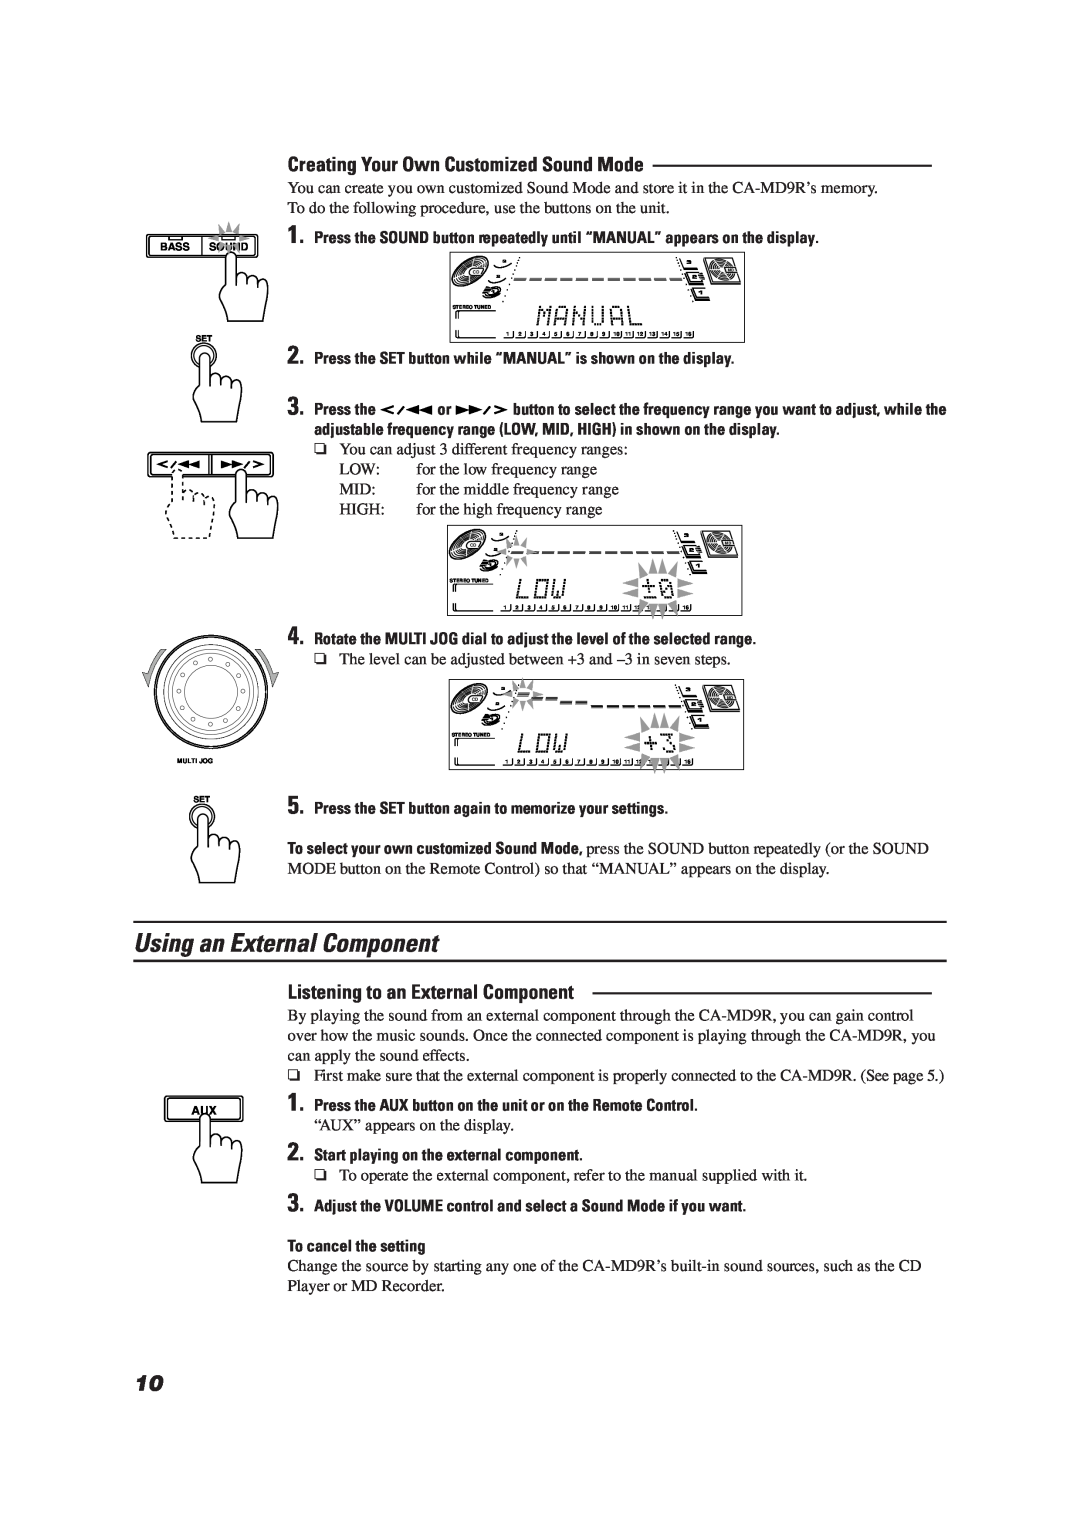 JVC LET0070-002A manual Using an External Component, Start playing on the external component, To cancel the setting 